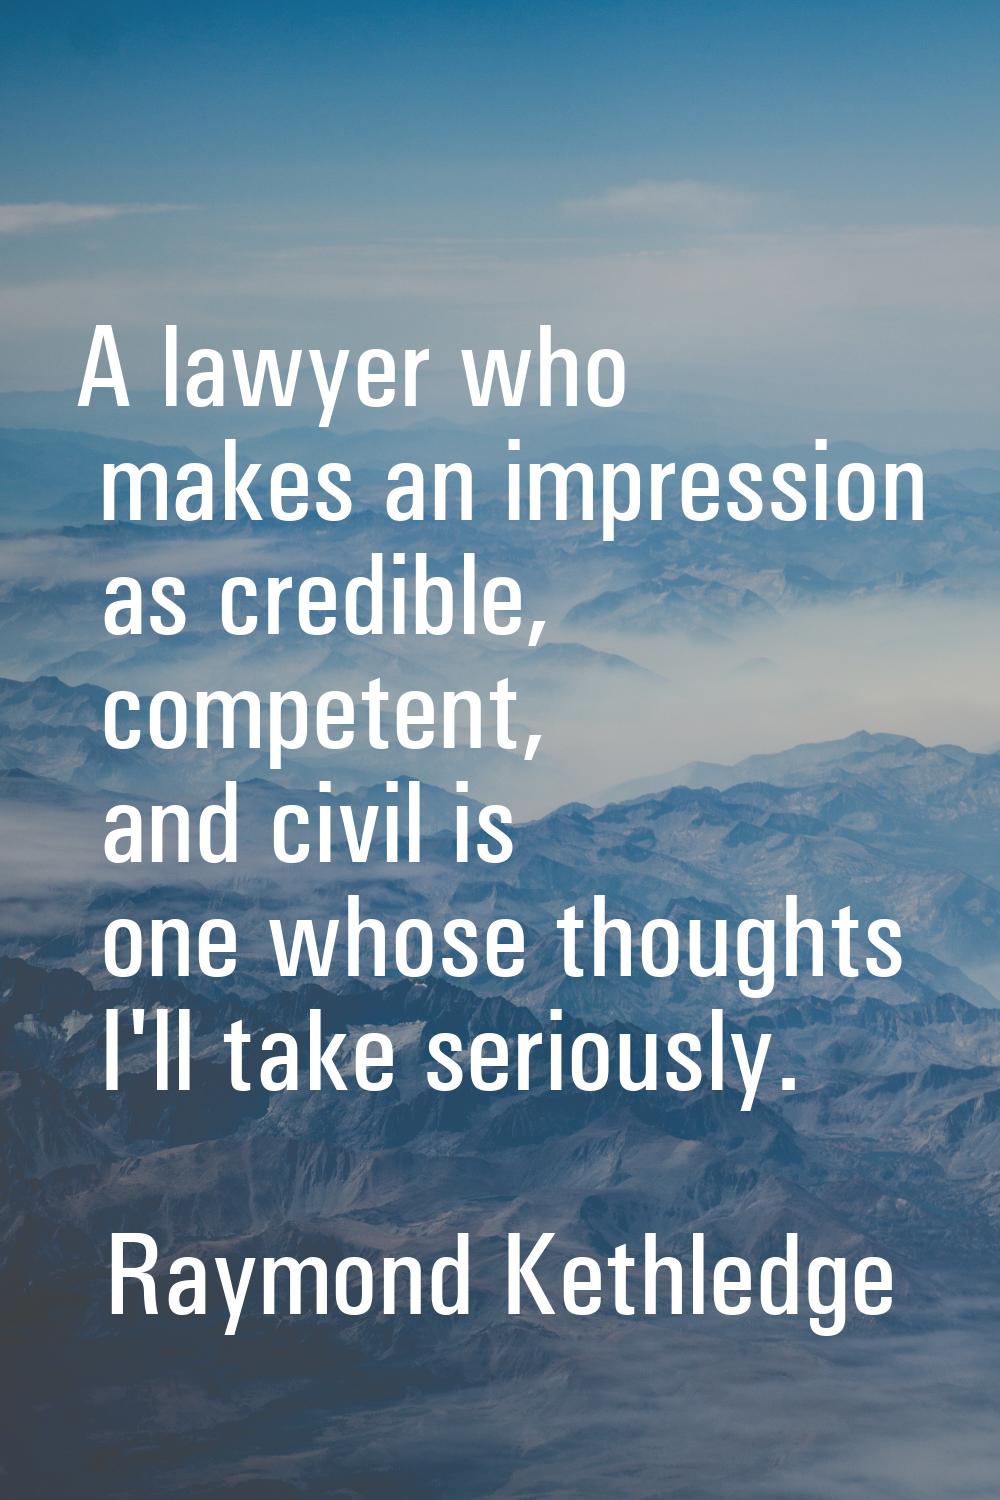 A lawyer who makes an impression as credible, competent, and civil is one whose thoughts I'll take 